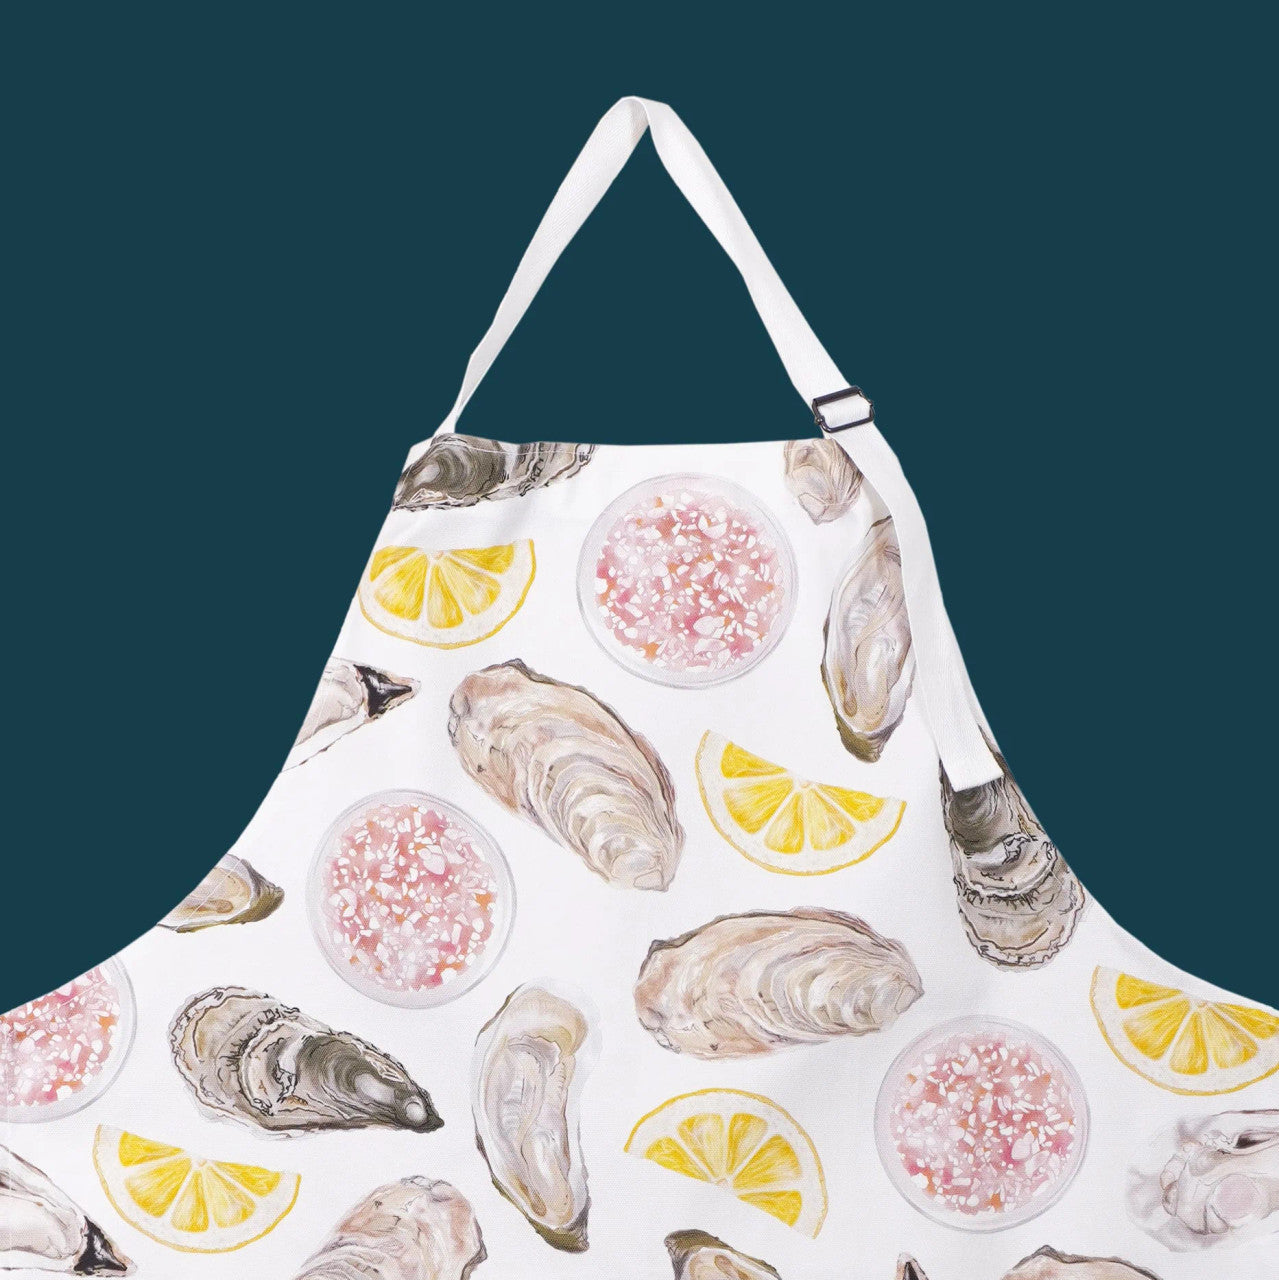 Oyster Apron by Corinne Alexander.